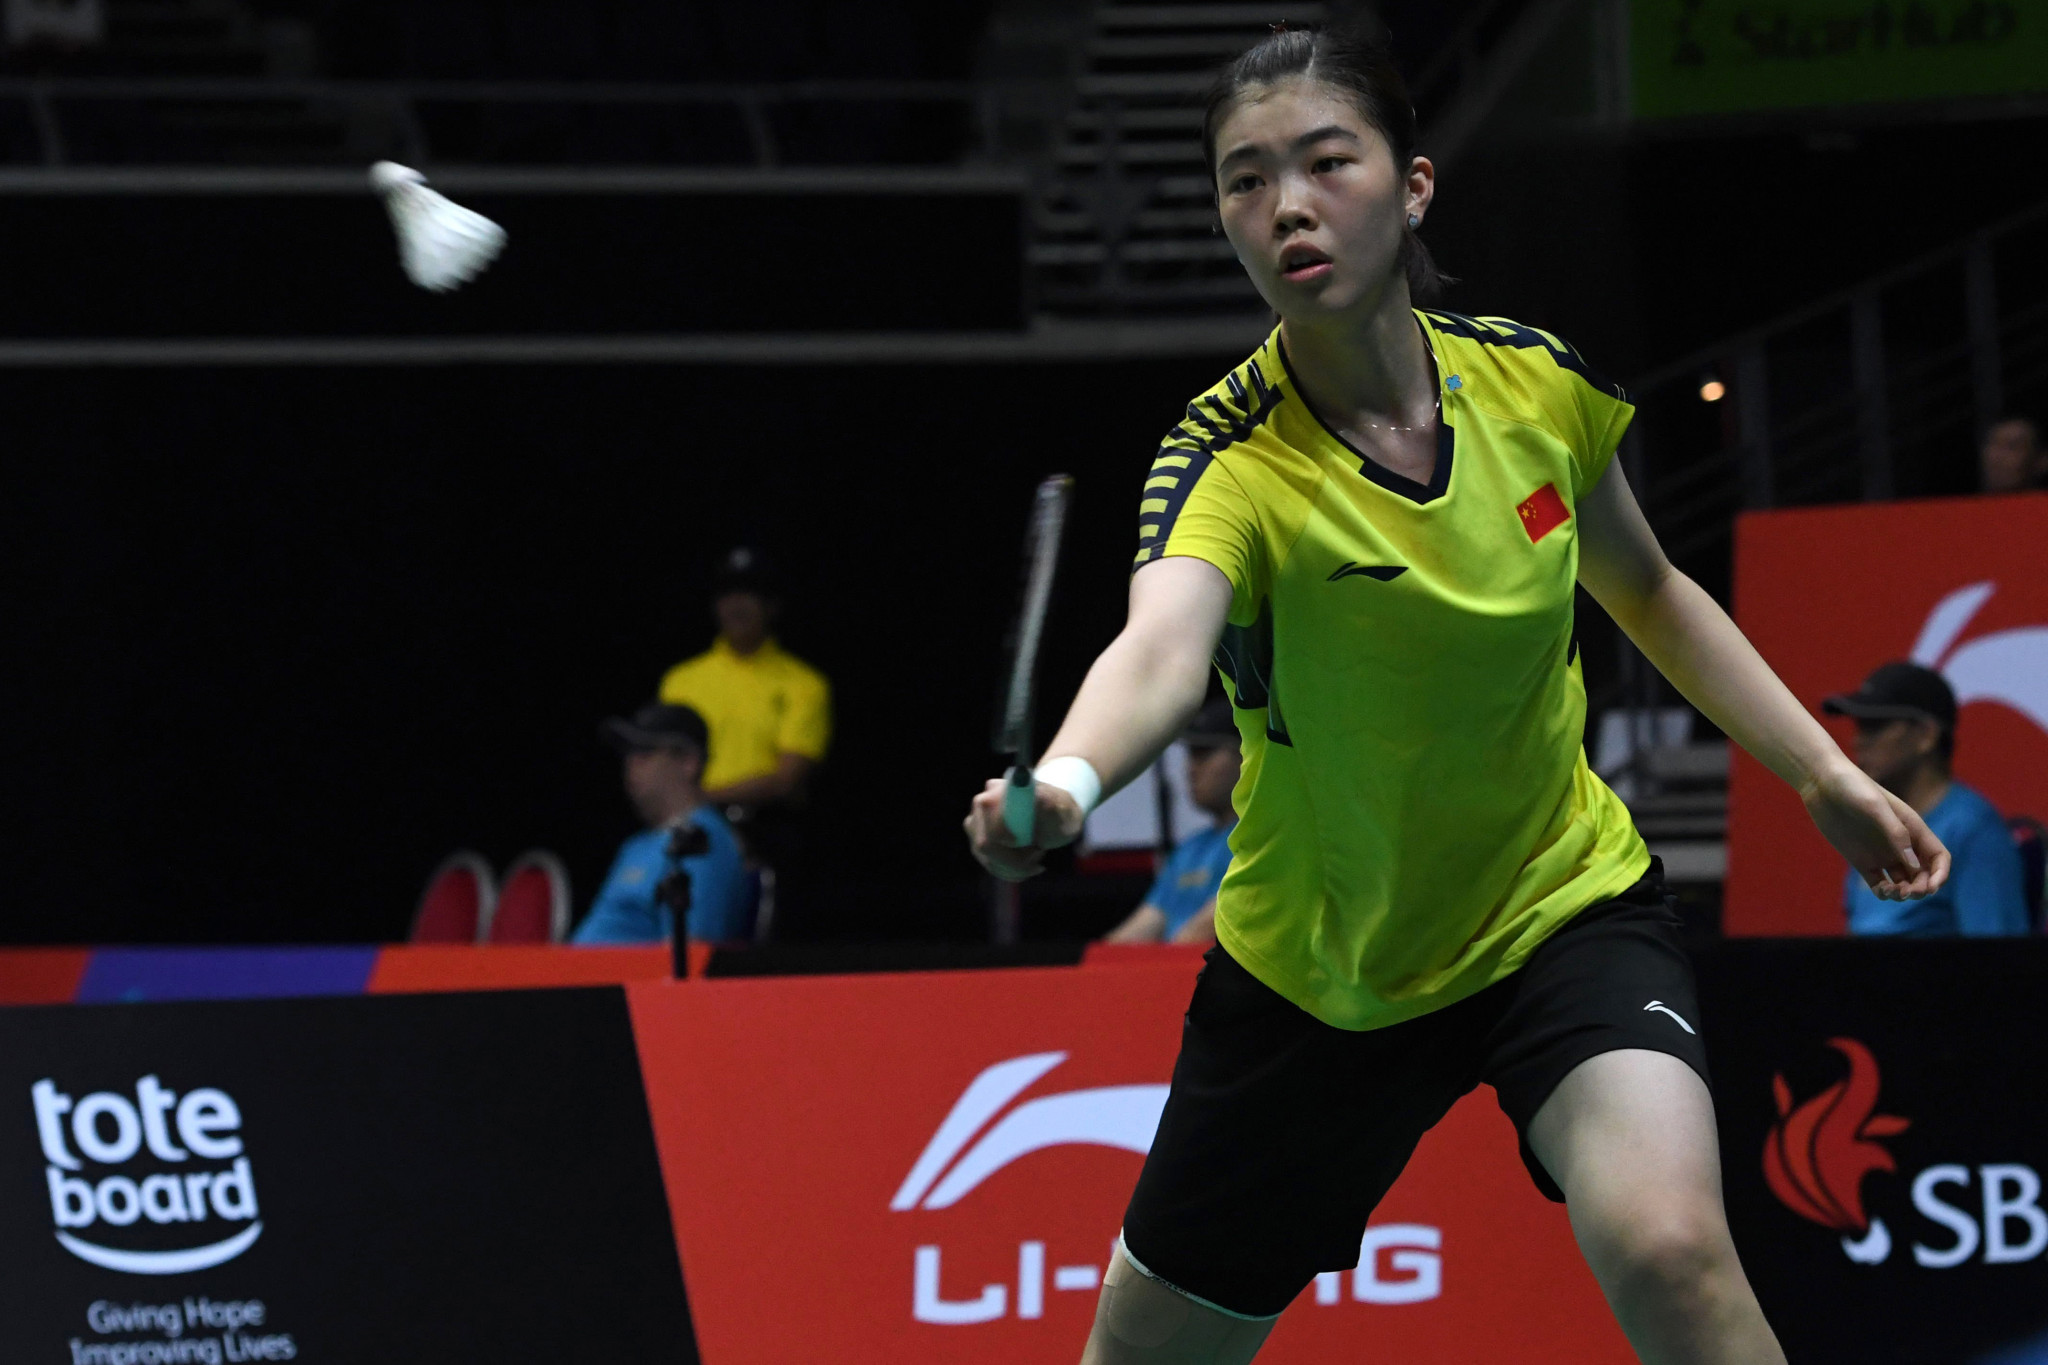 Gao Fangjie of China overcame the highest-seeded player in the women's singles draw to reach the final of the BWF Singapore Open ©Getty Images